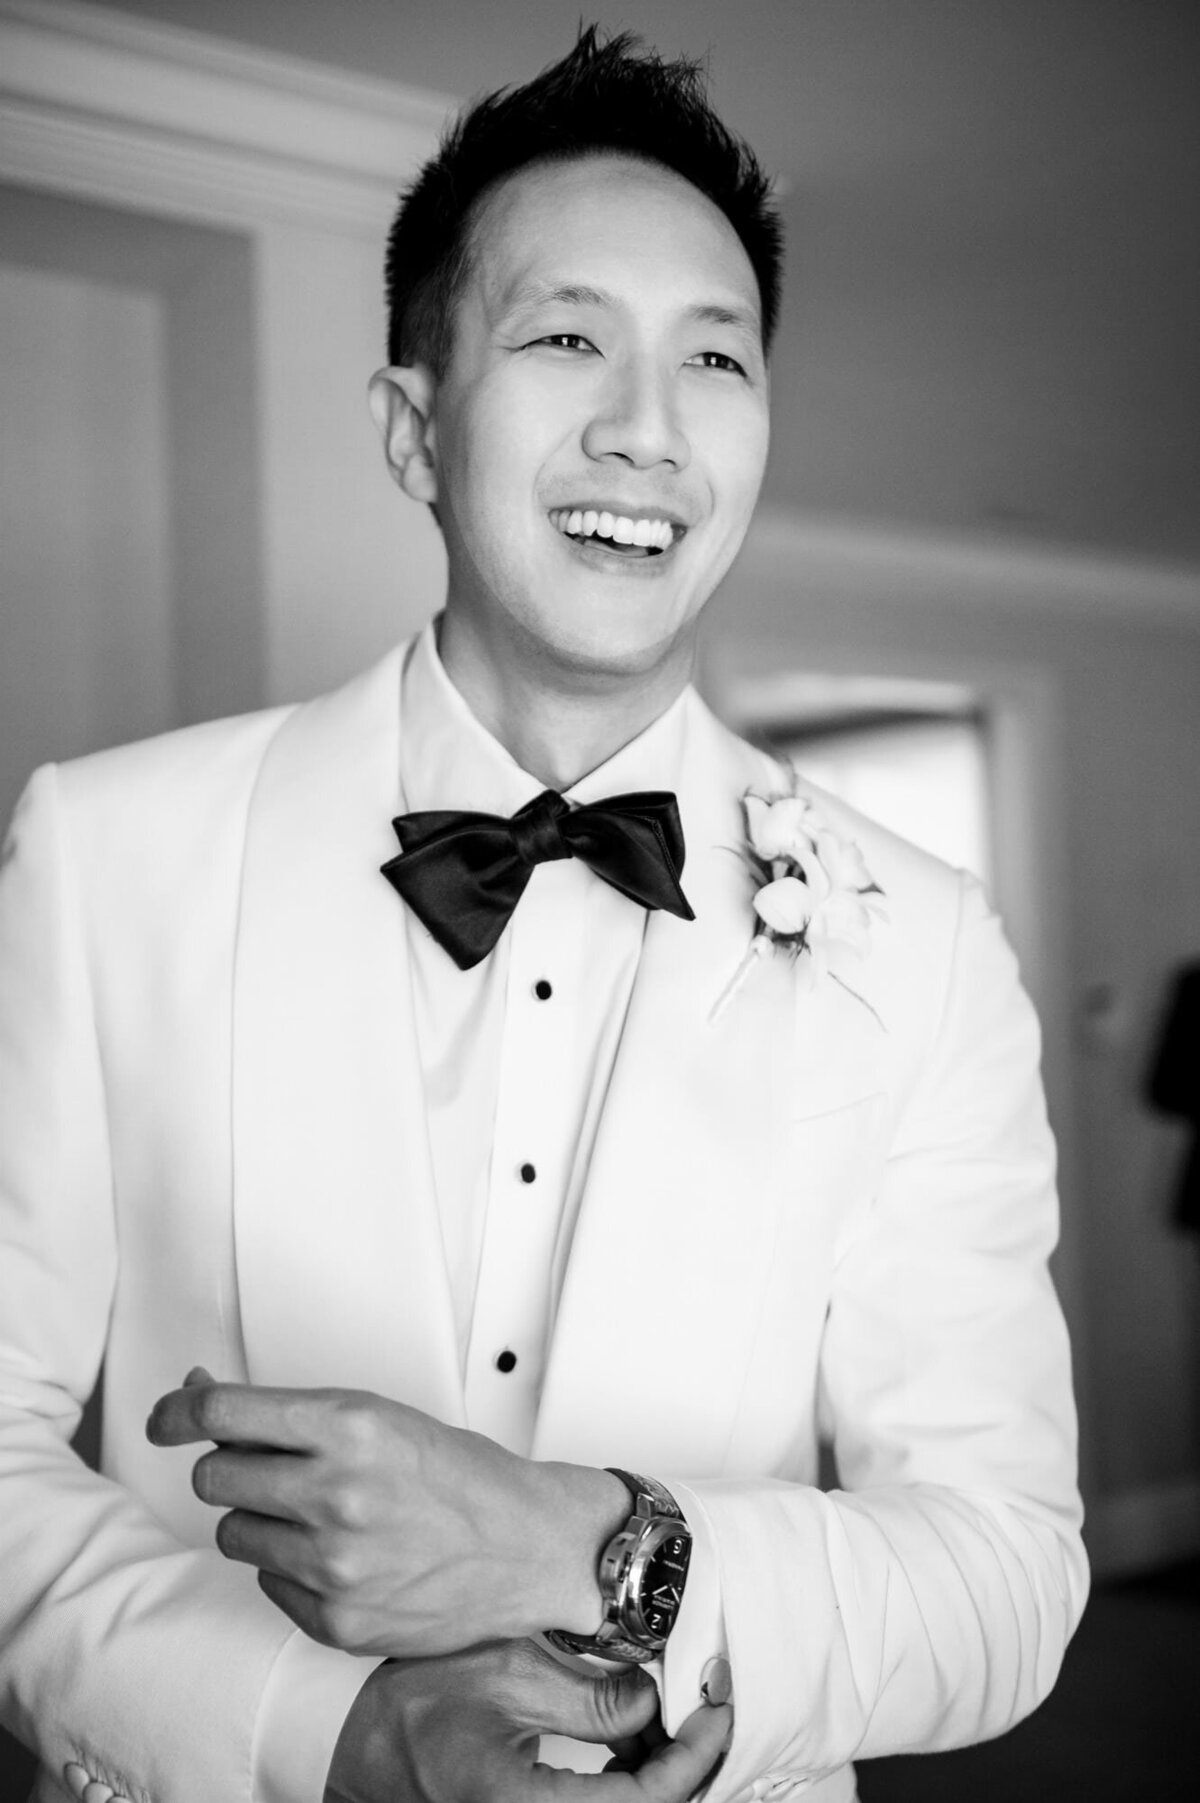 Portrait of a Groom smiling and fixing cuff links